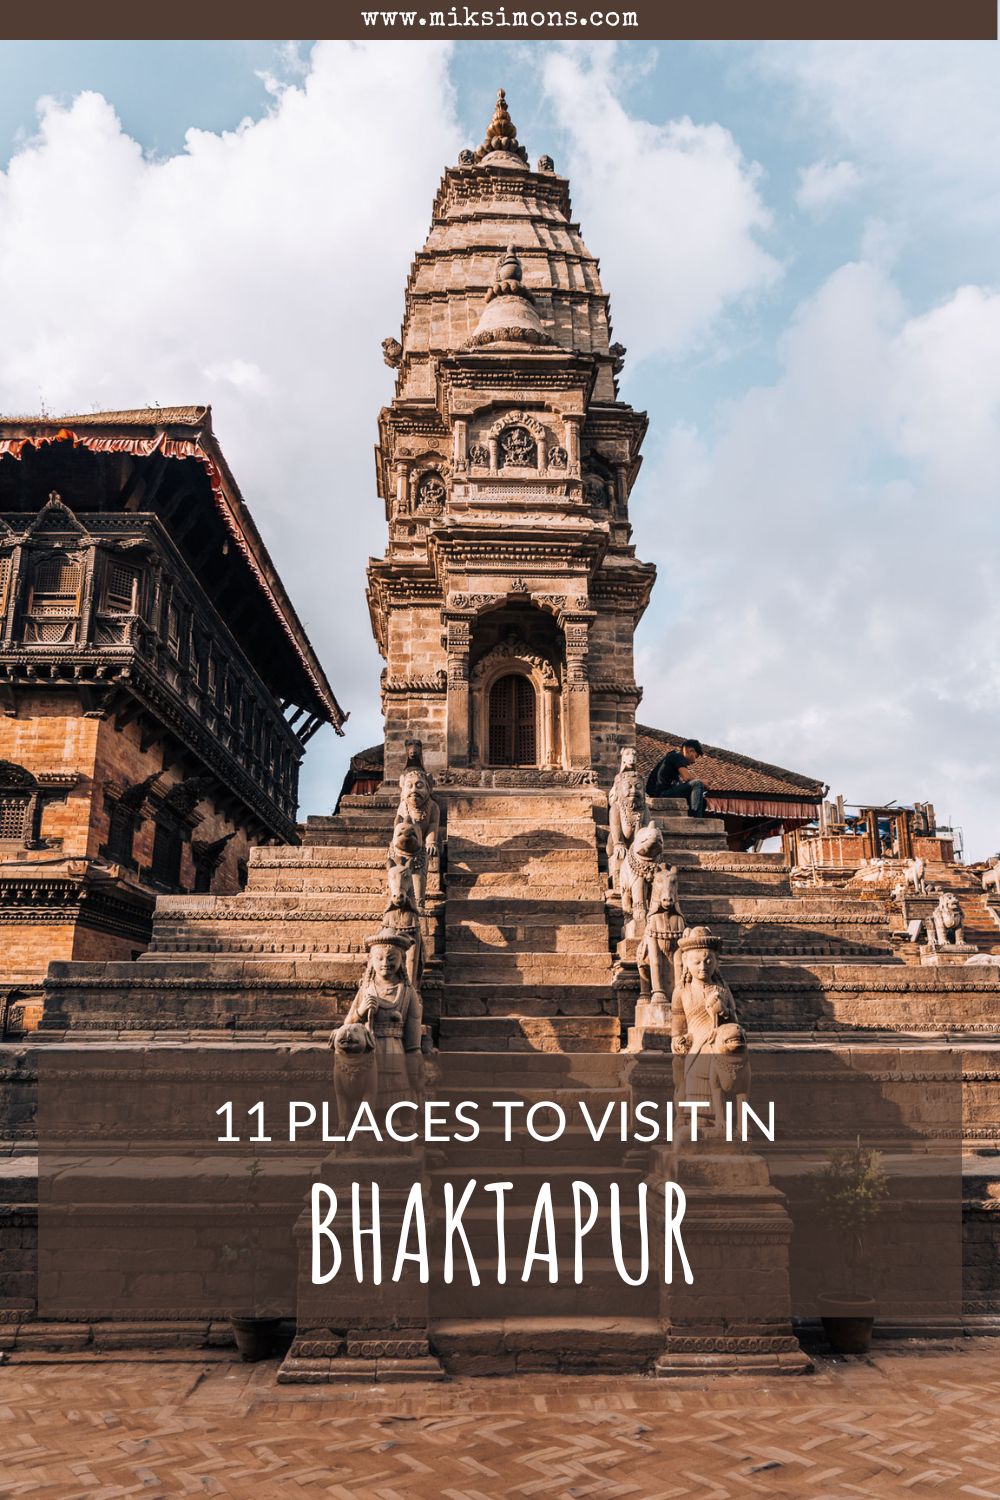 11 Awesome places to visit in Bhaktapur in Nepal2